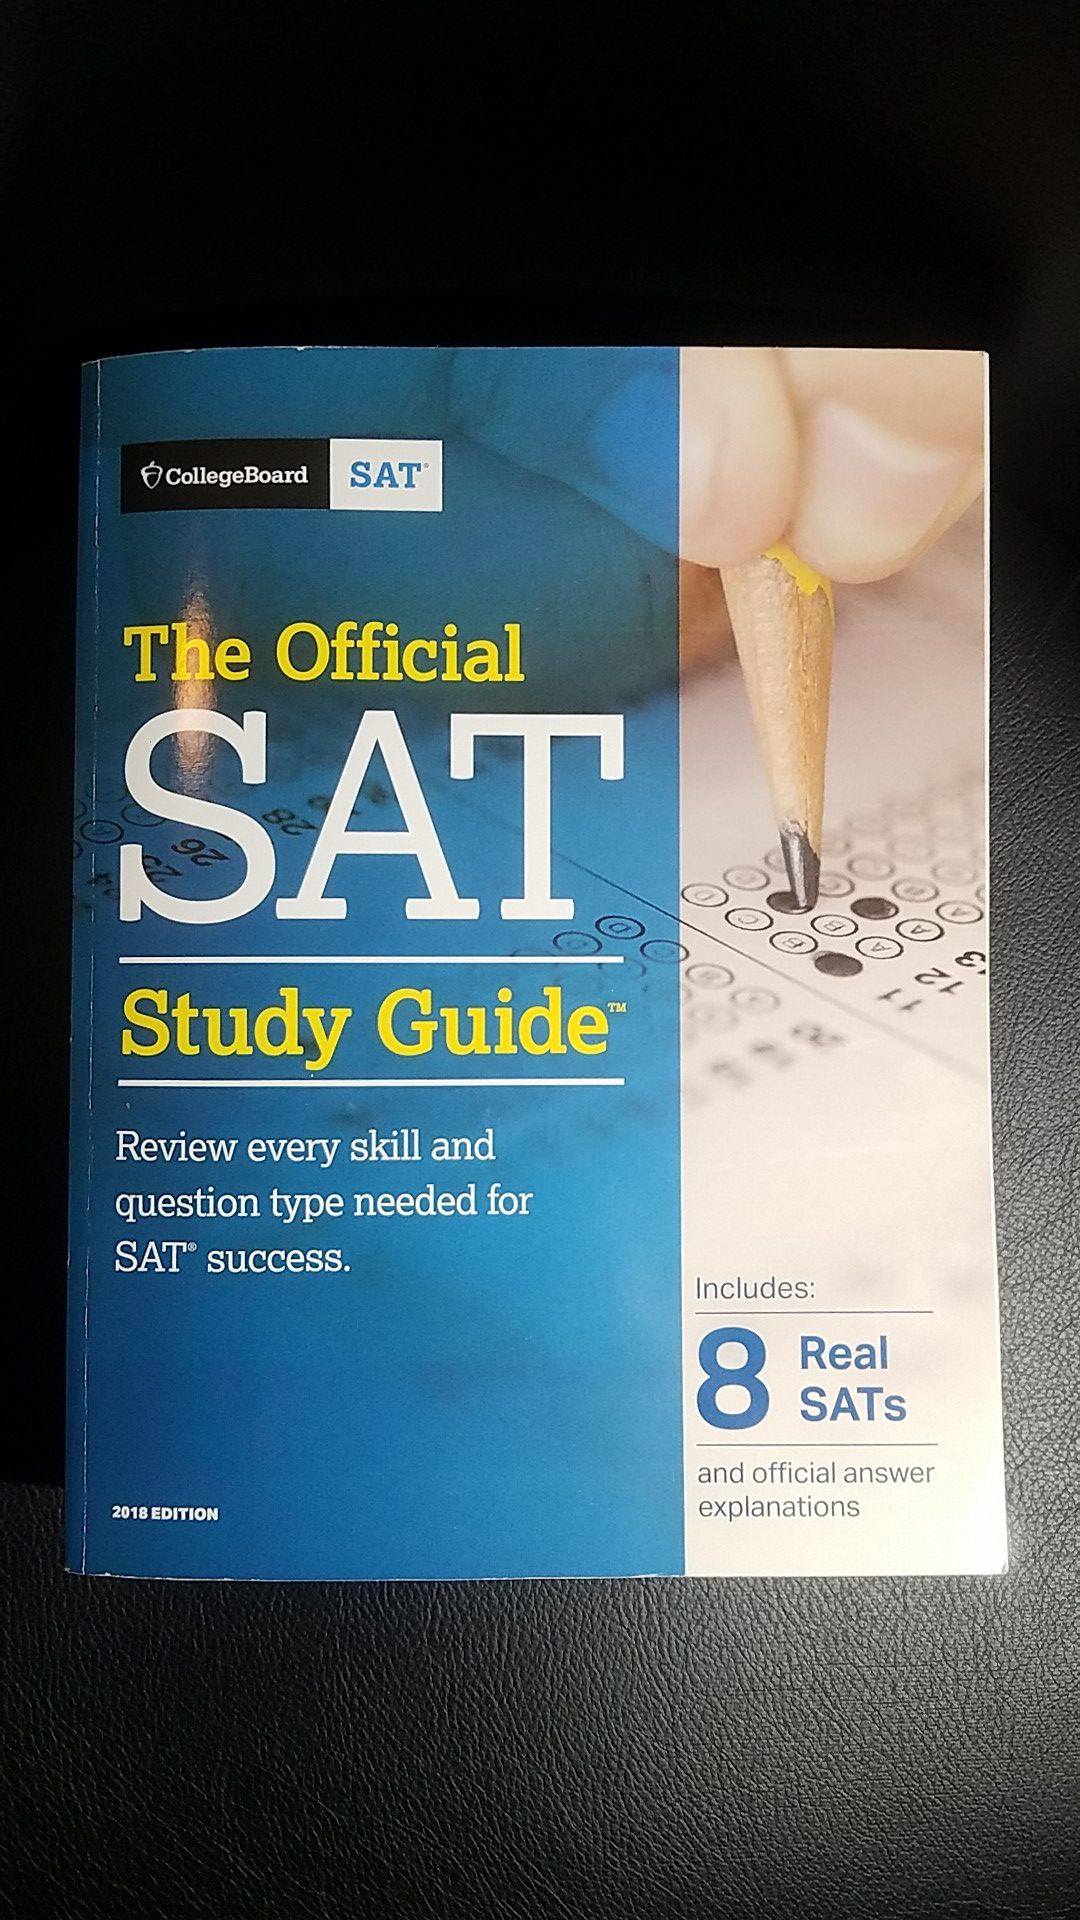 The Official SAT Study Guide 2018 Edition (College Board)